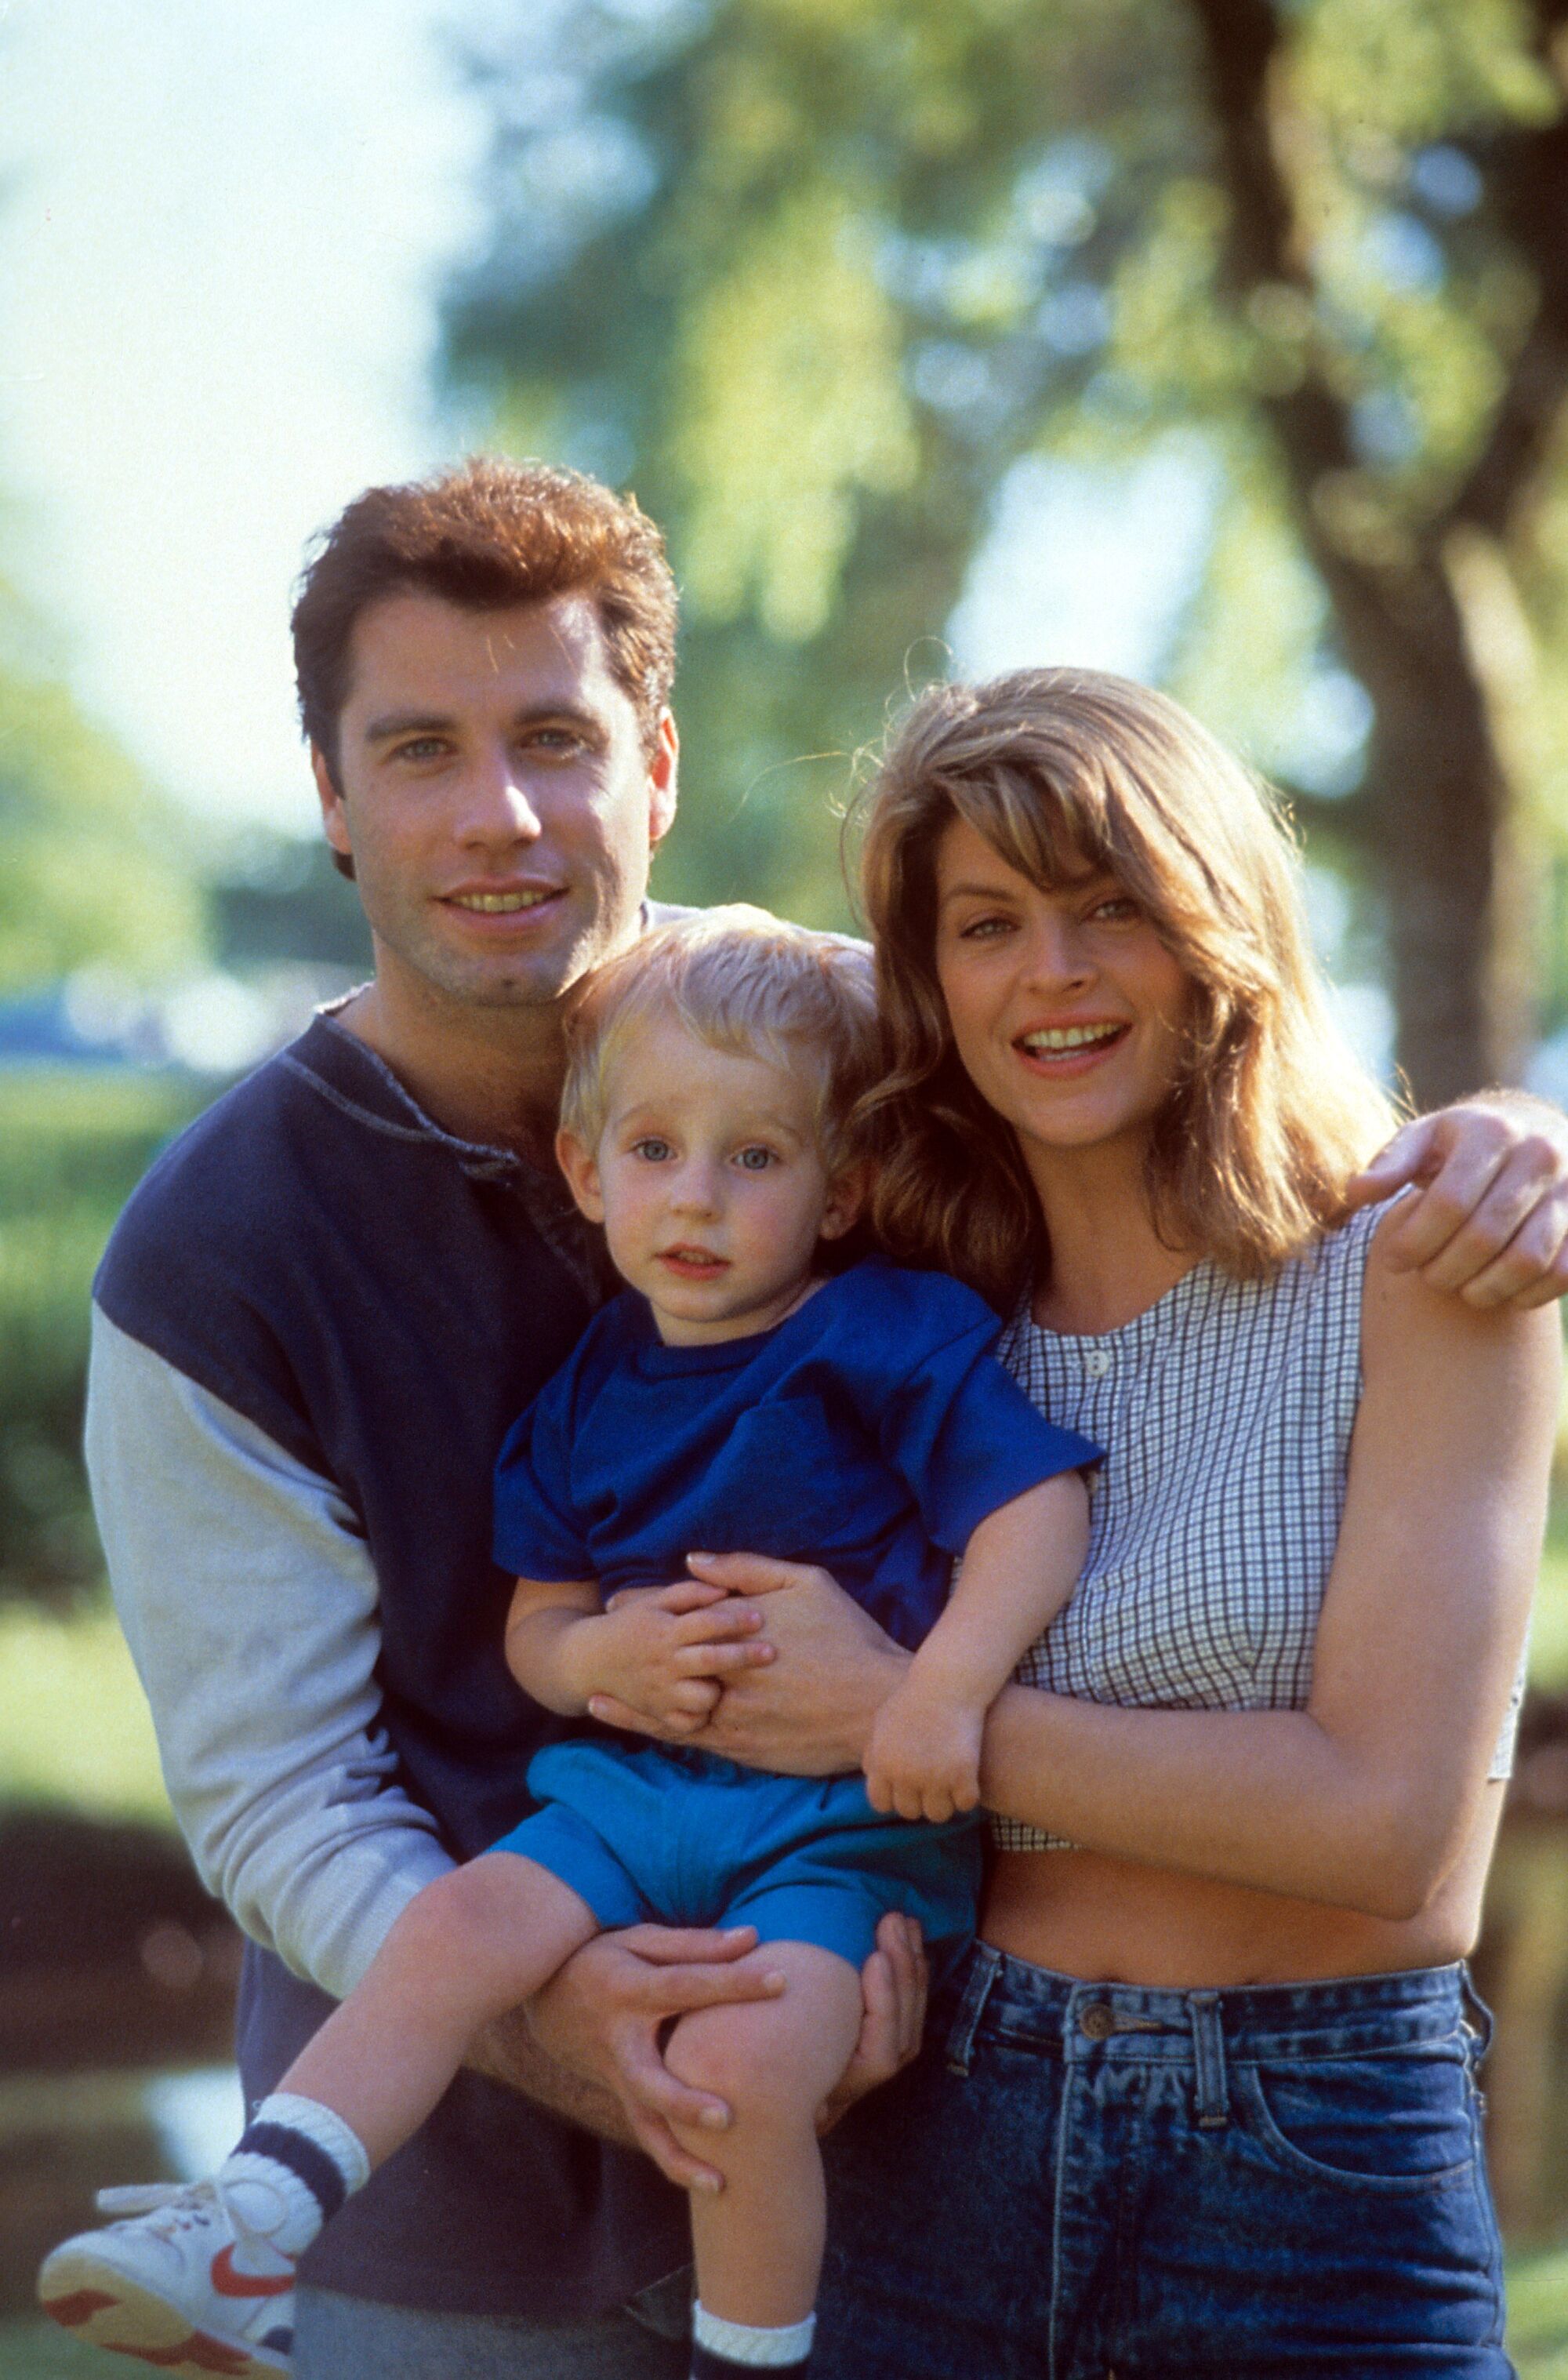 John Travolta and Kirstie Alley holding a young child.